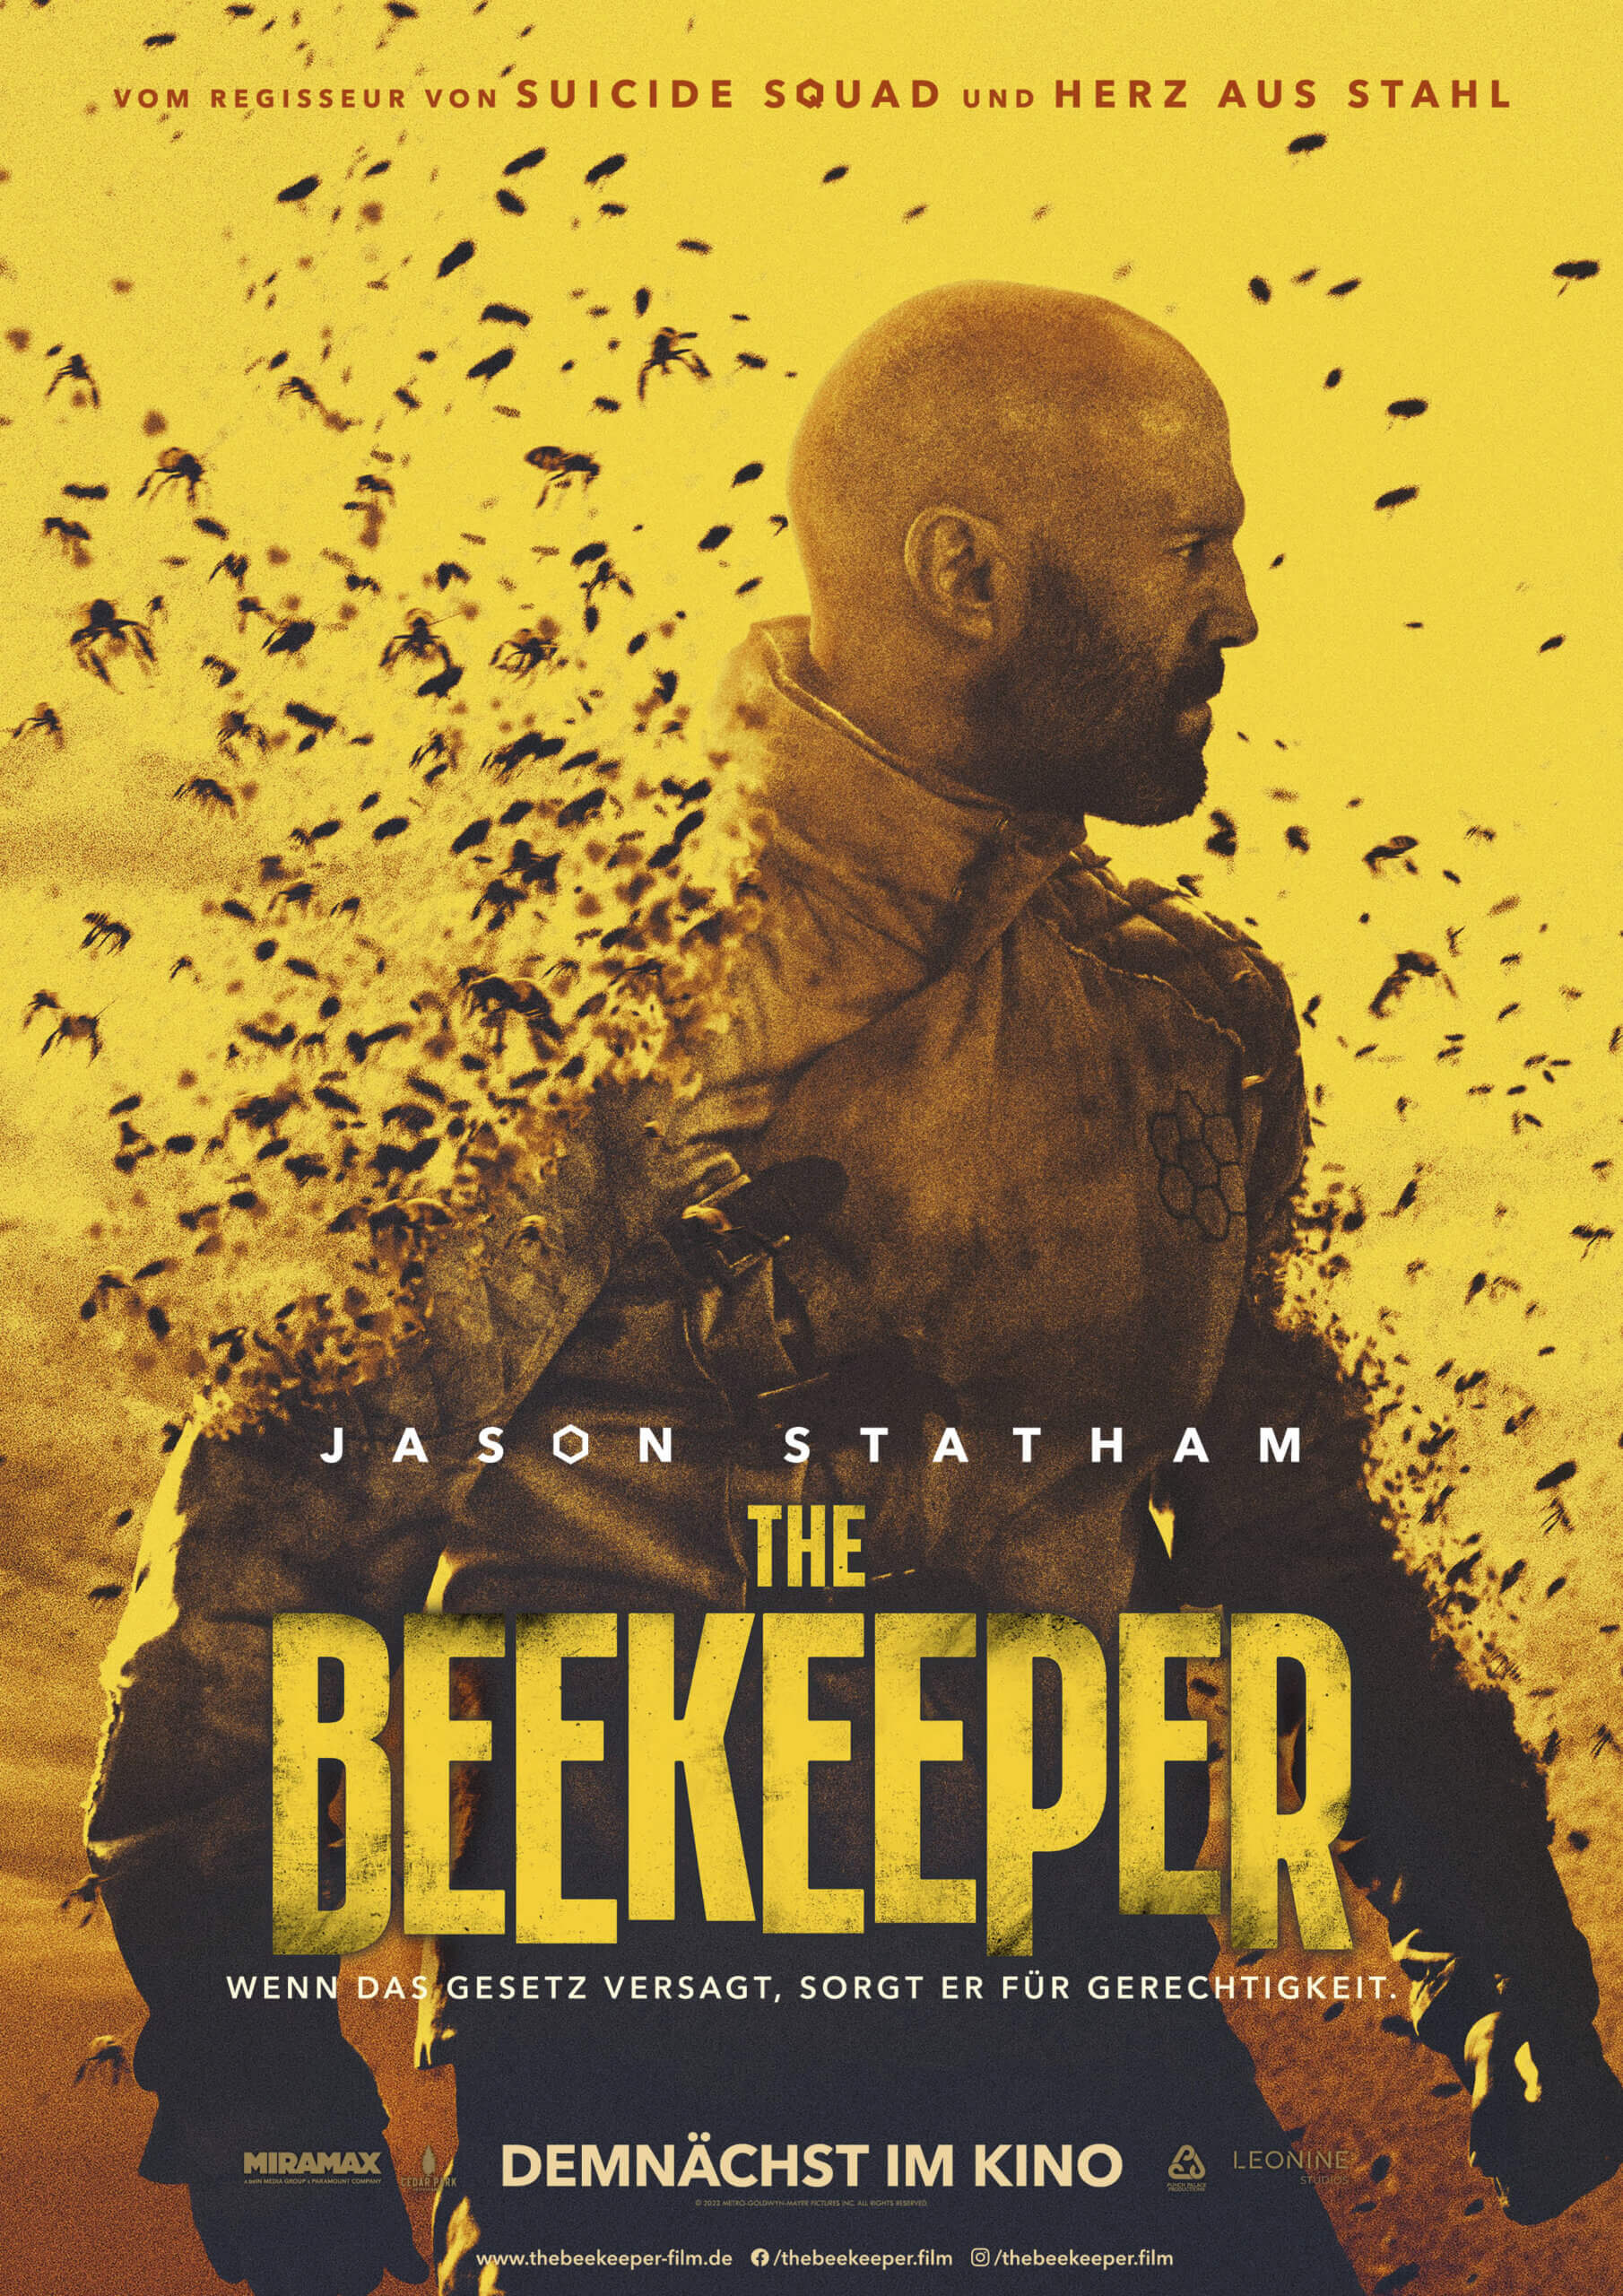 The Beekeeper review